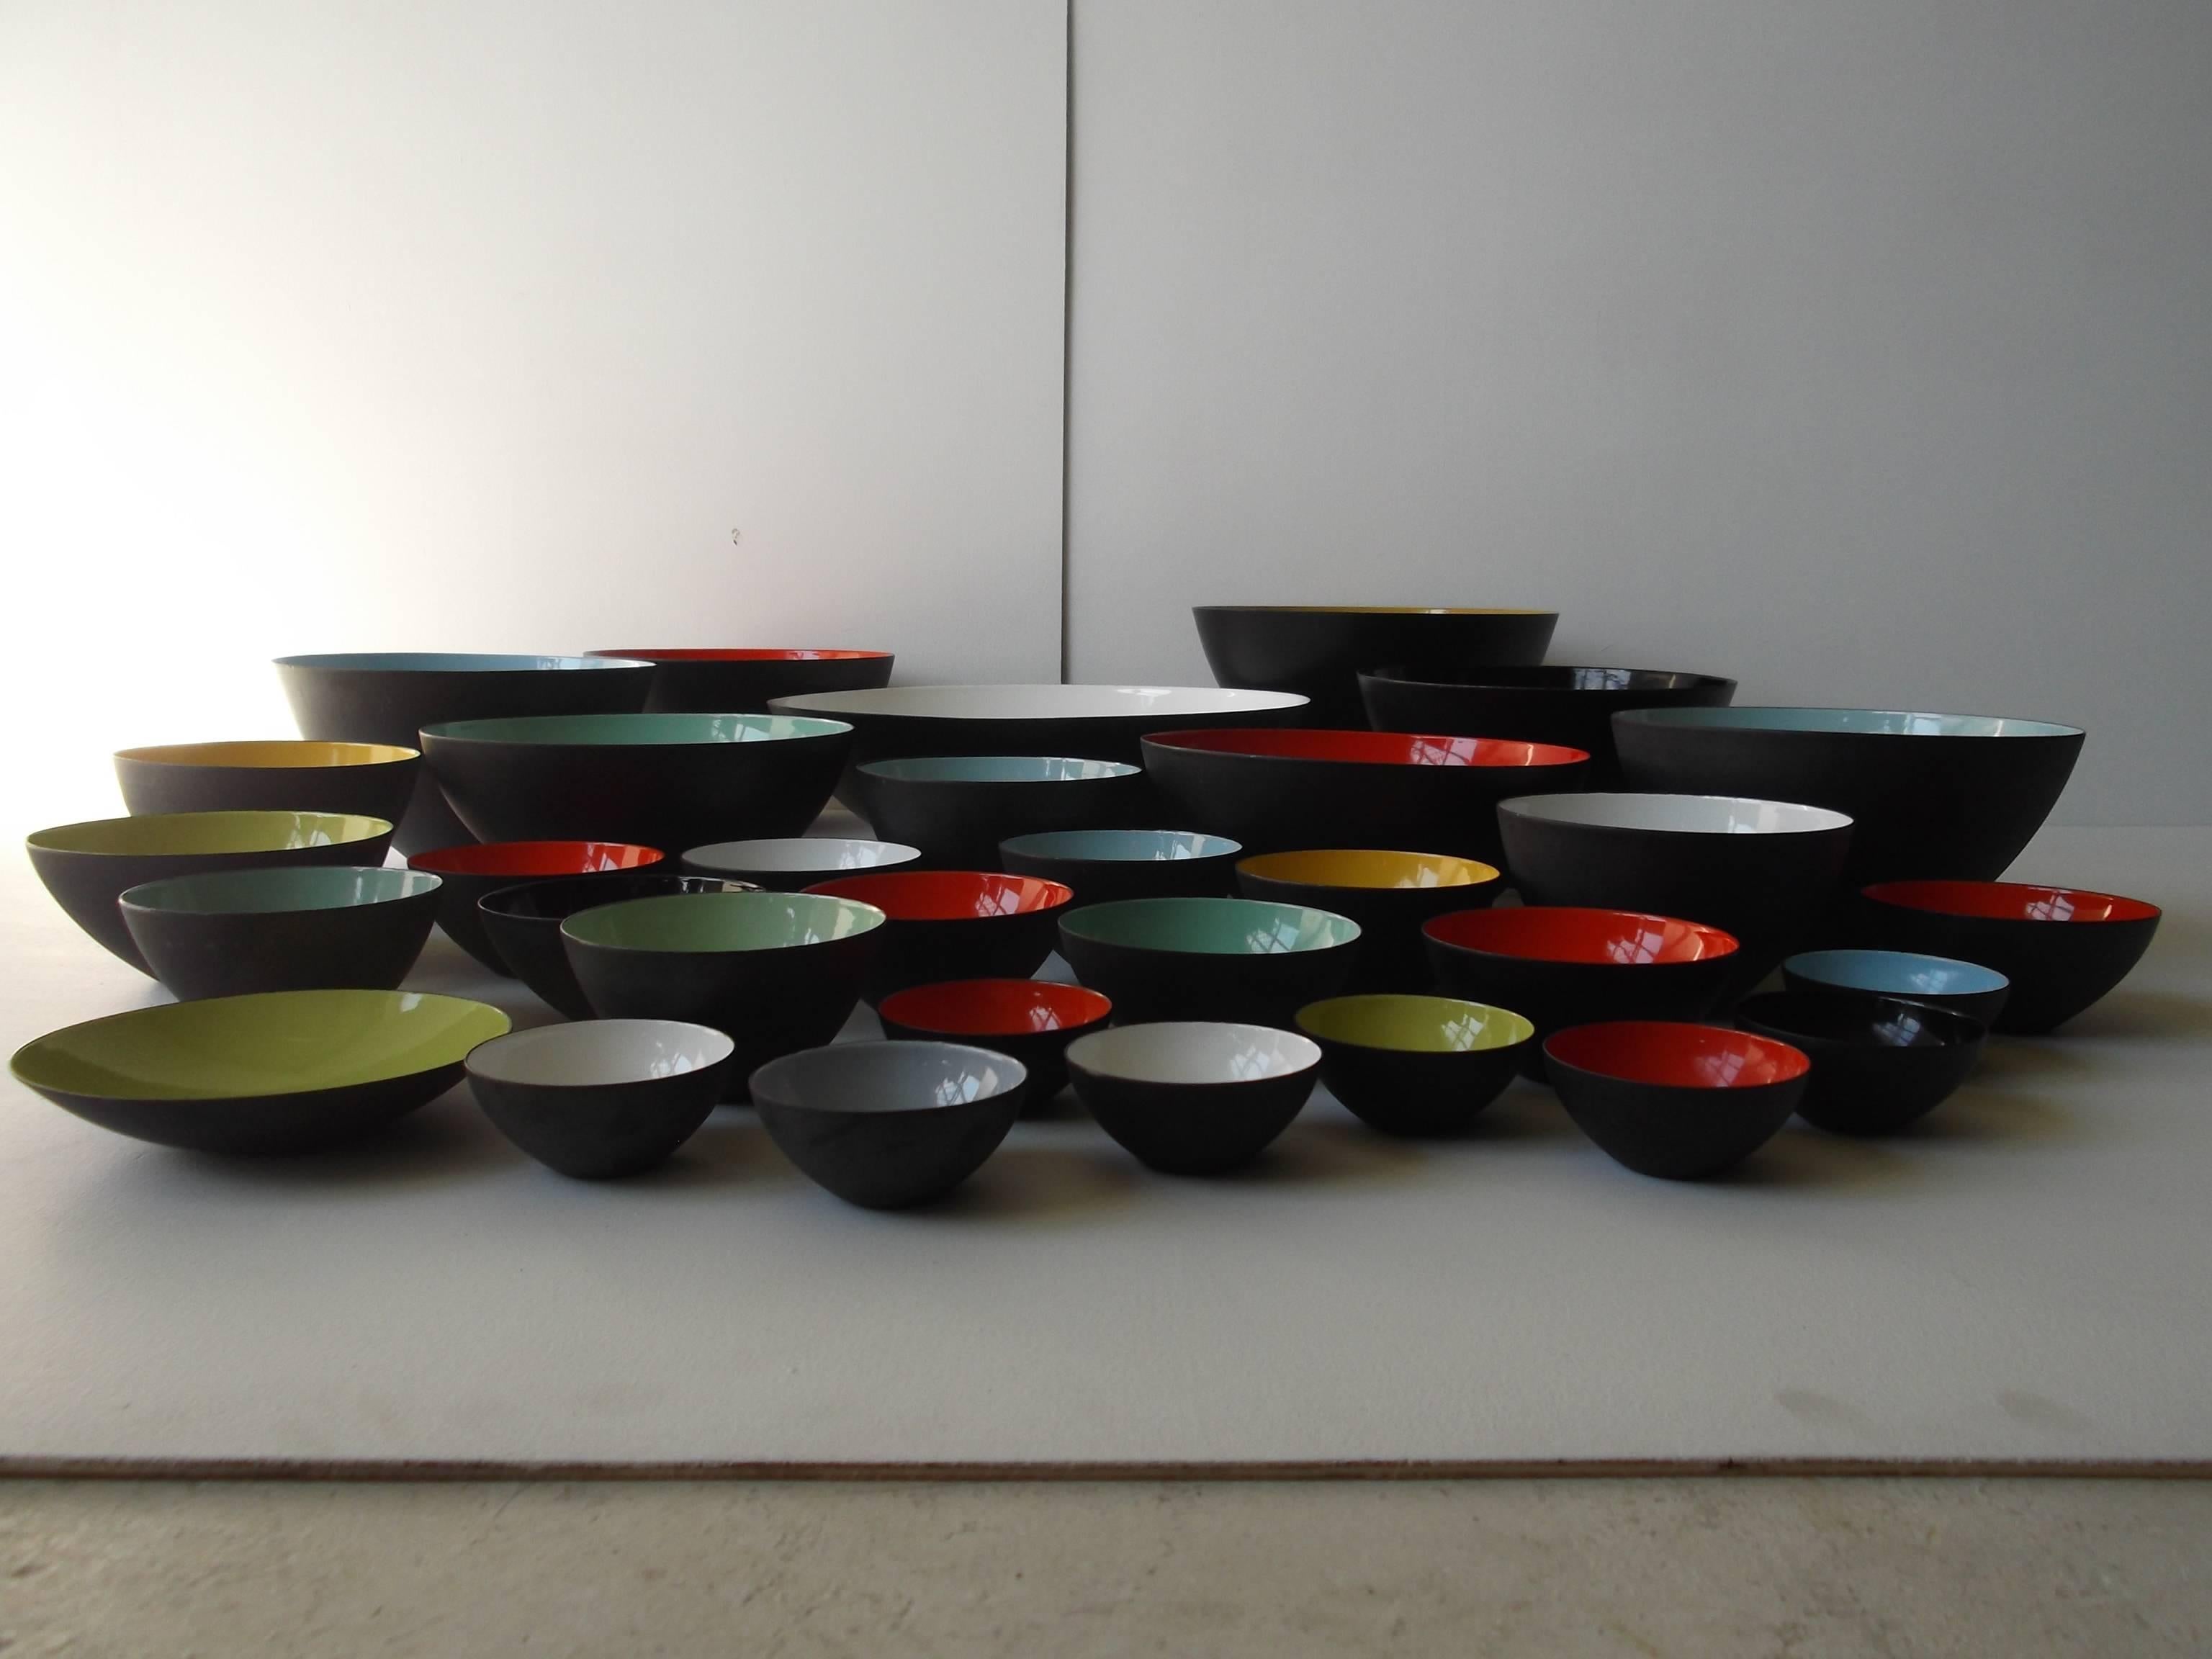 This is a fantastic collection of 33 Krenit bowls designed by Herbert Krenchel of Denmark. Orig. design won awards in 1954. They are all heavy enamel steel in colors. Most all of these are vintage. Many signed, many not. They range from the small 3